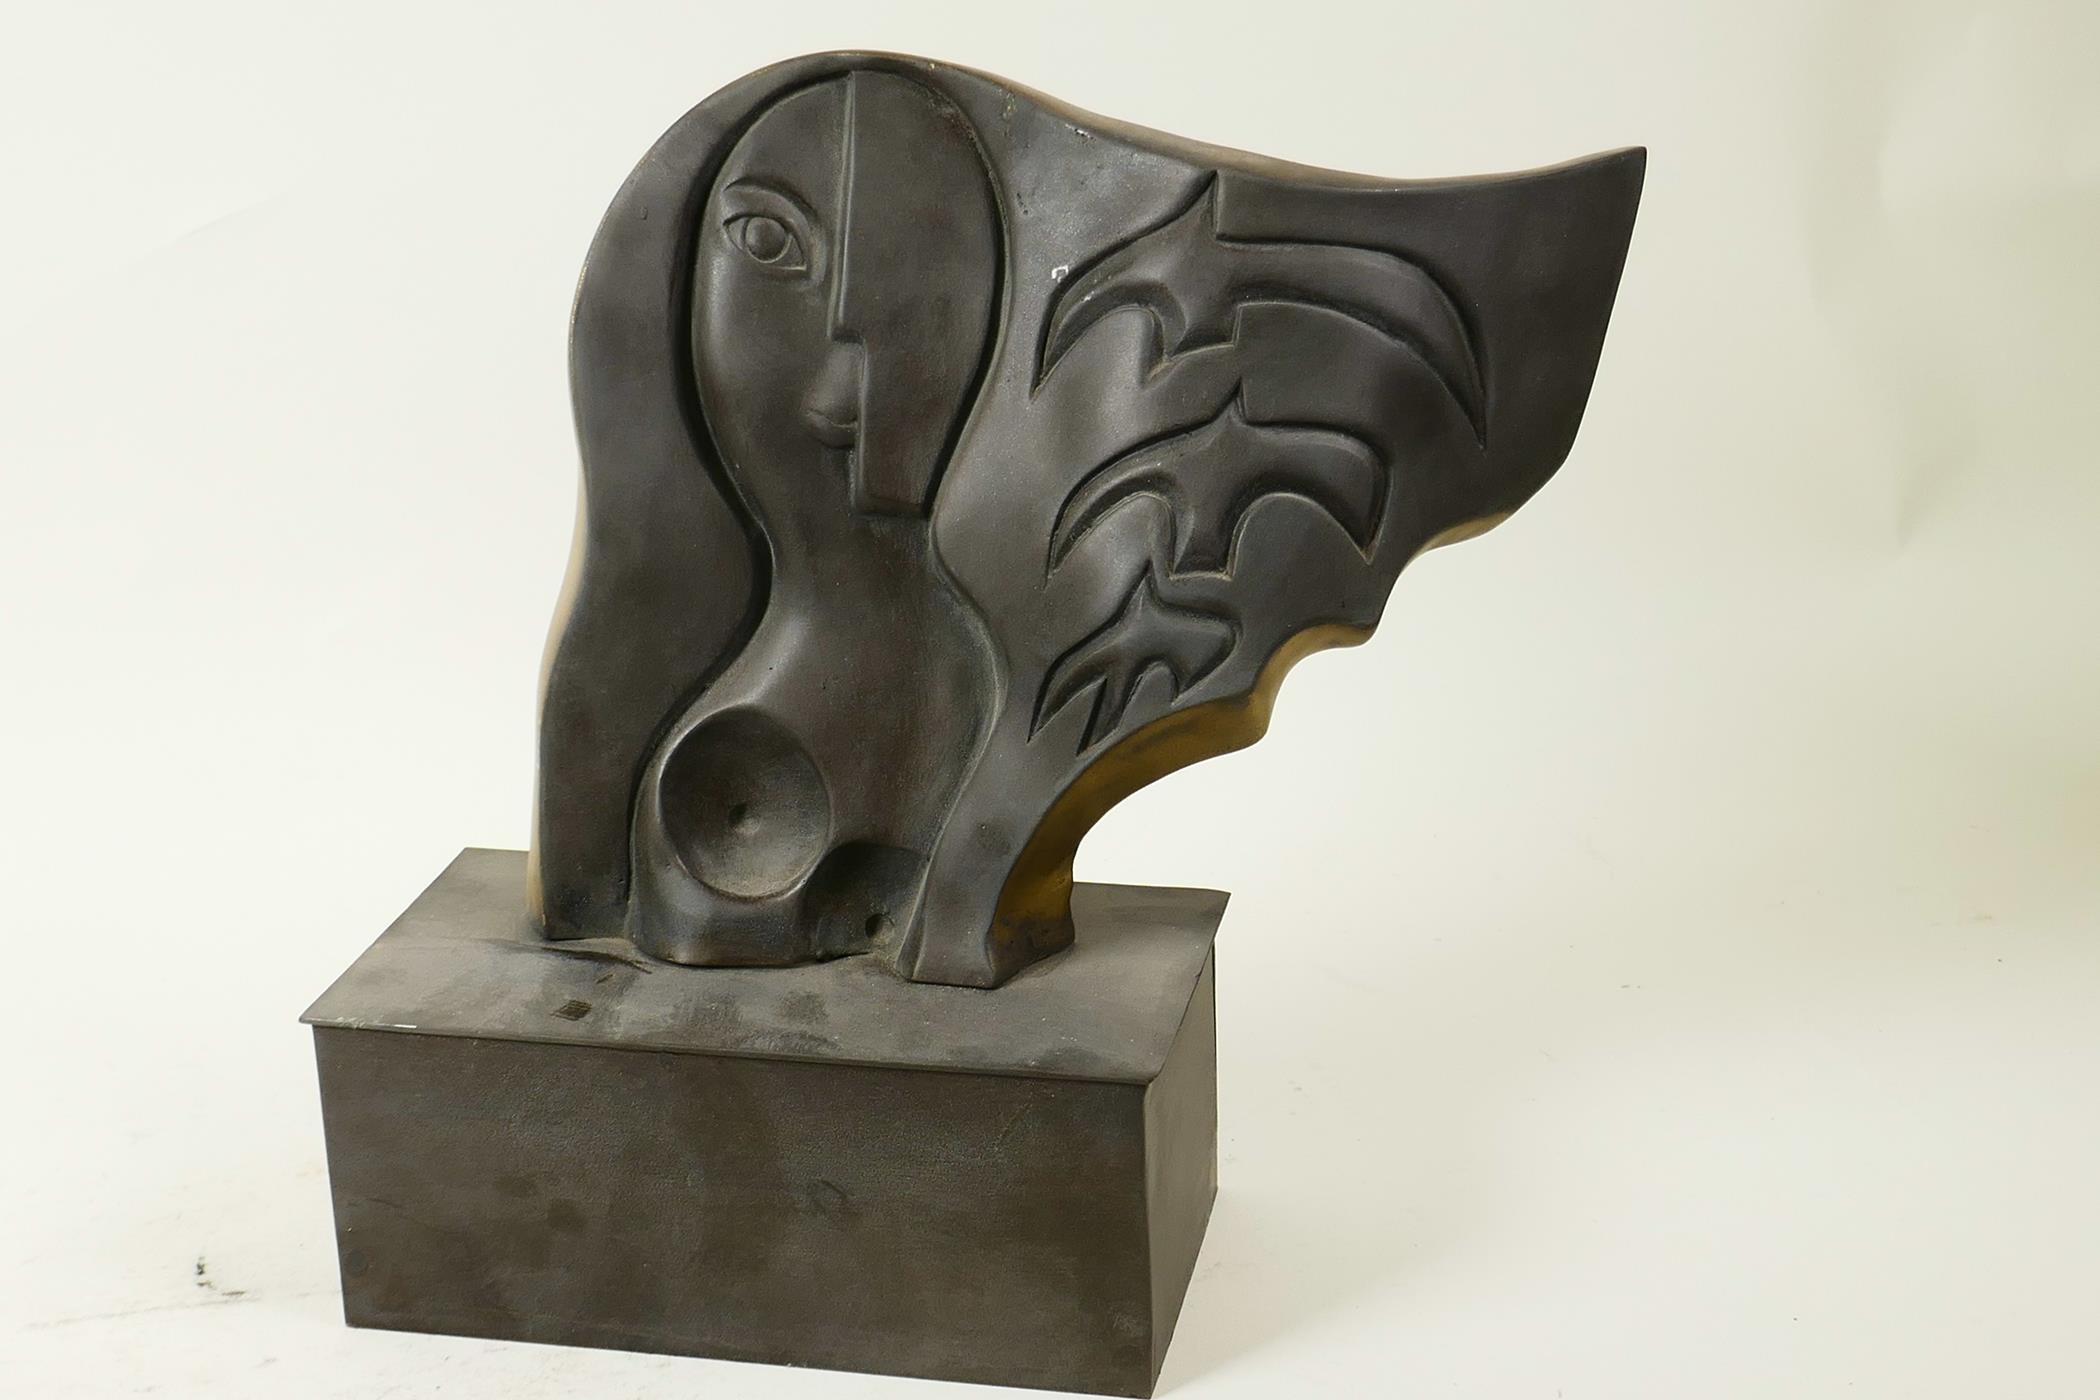 A modernist pressed bronze sculpture in the style of Picasso on a rectangular plinth, 9" high